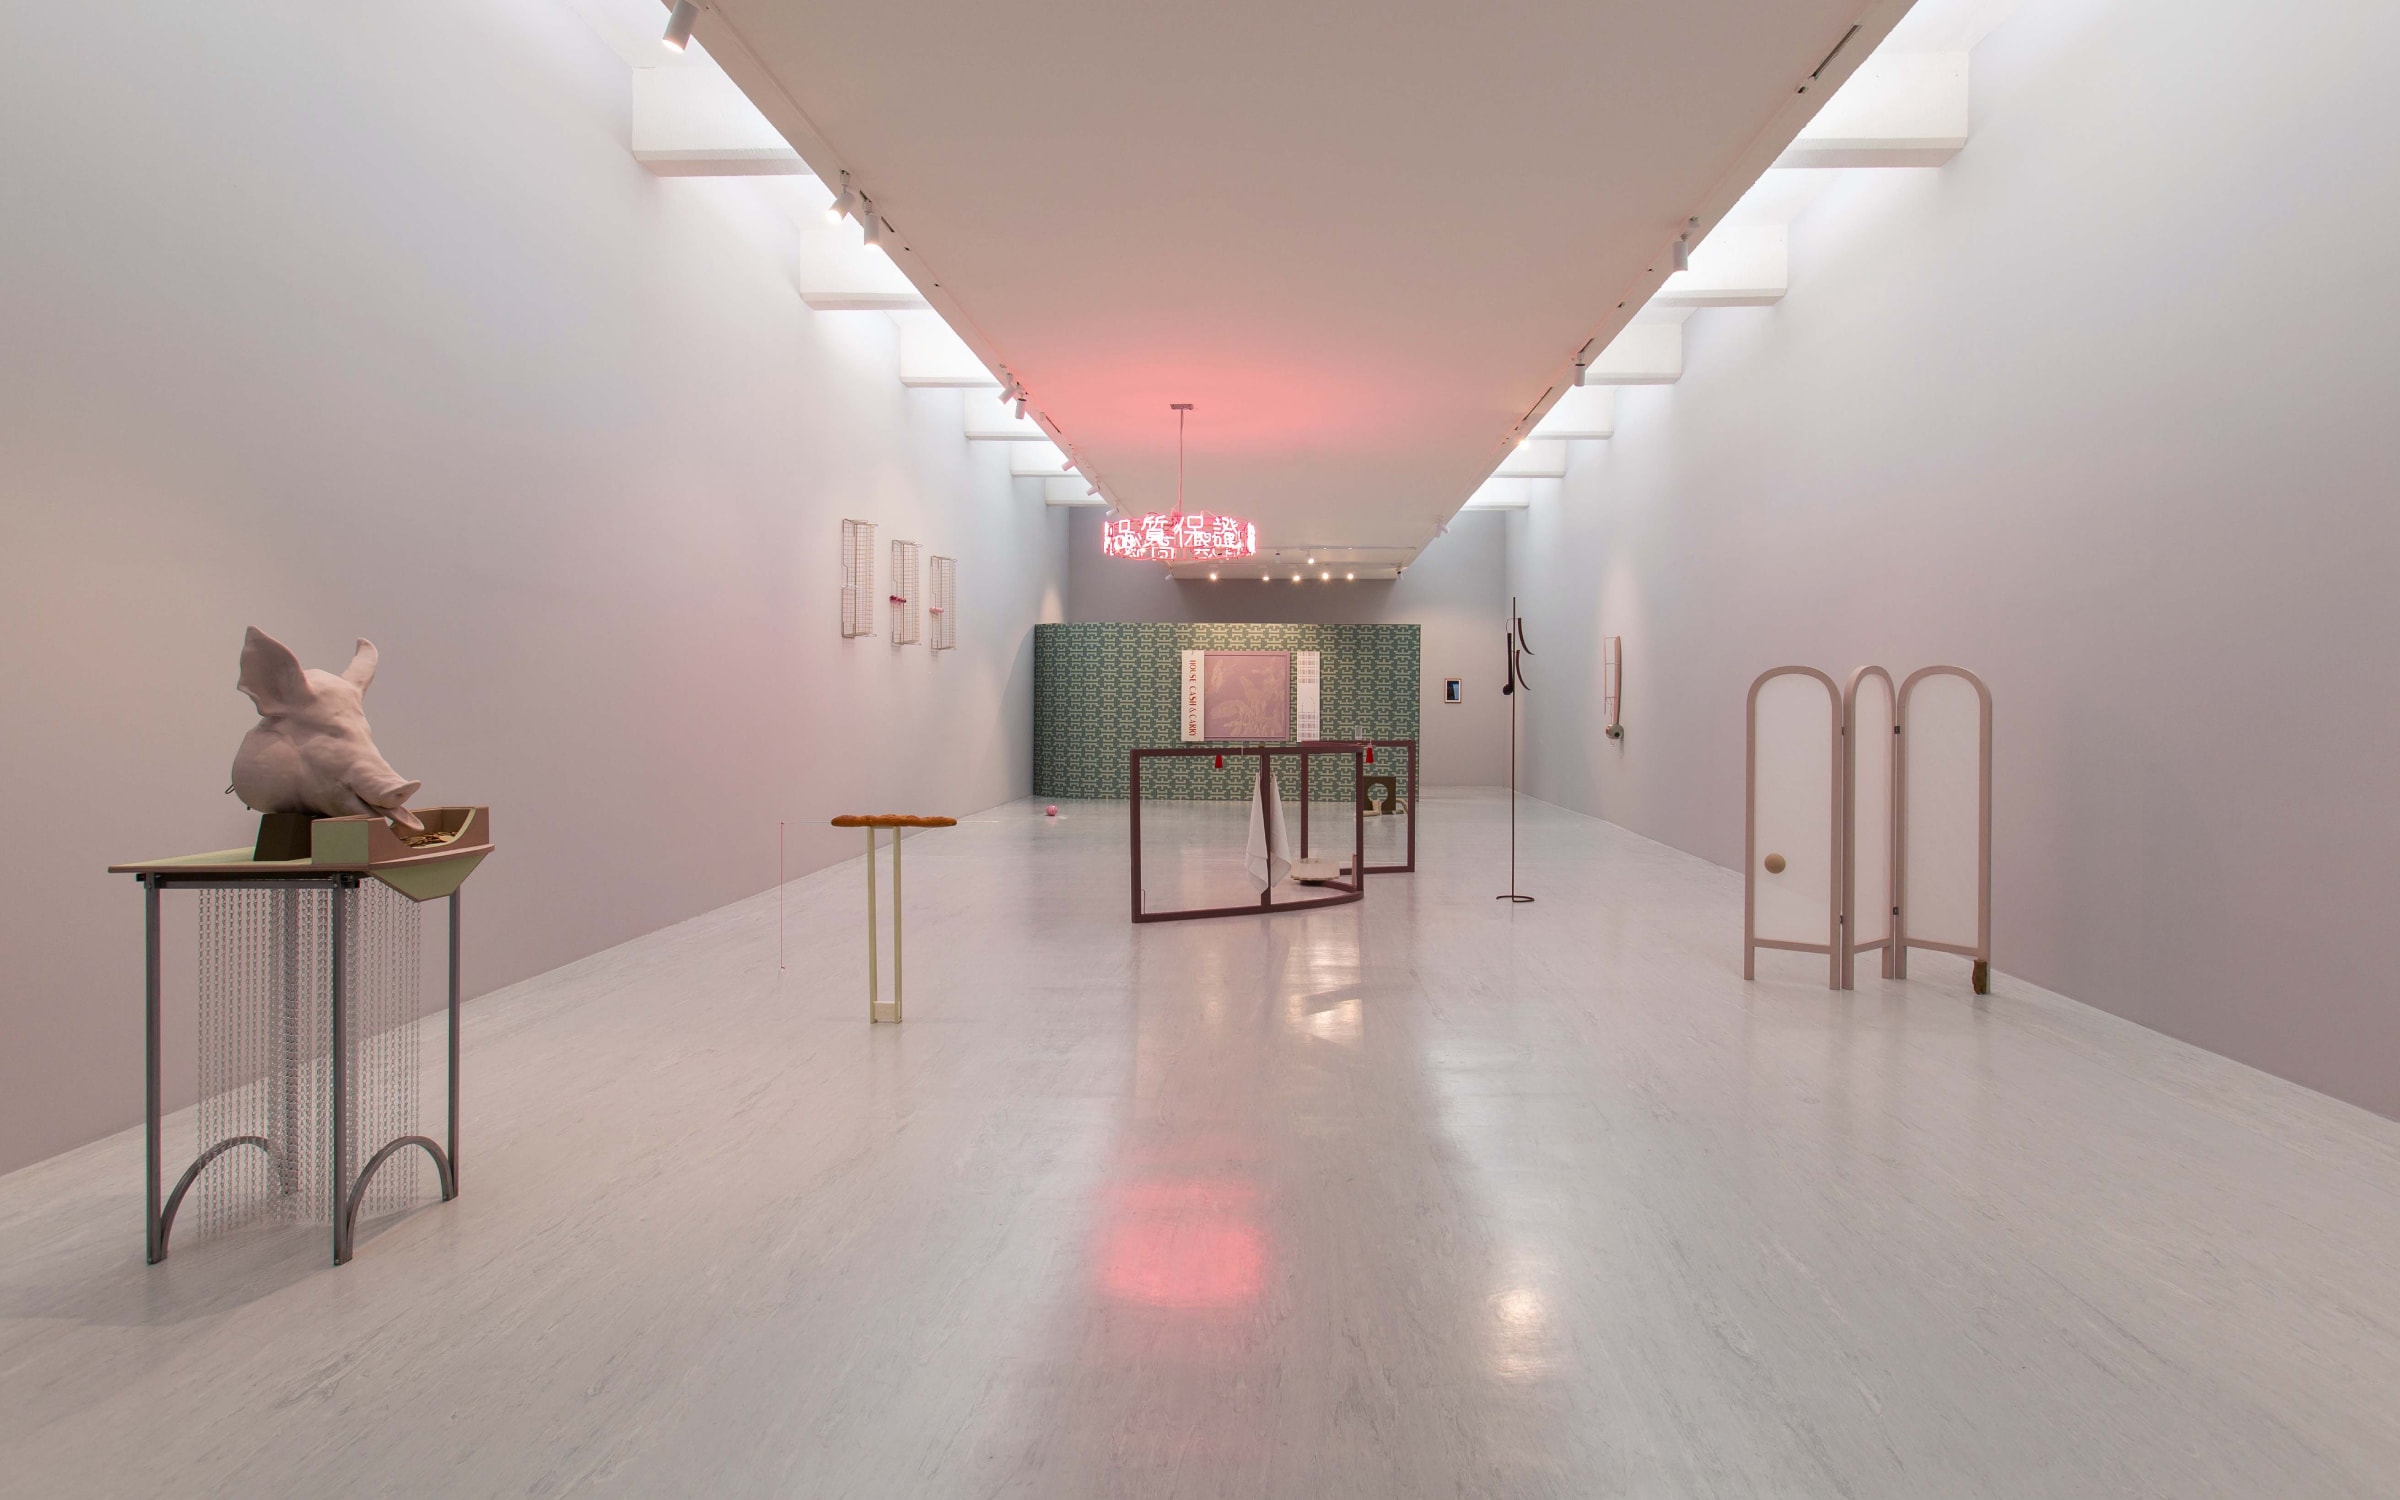 Installation view of Steph Huang's  "A Great Increase In Business Is On Its Way" at Taipei Fine Arts Museum, 2022. Courtesy of the artist and Public Gallery.